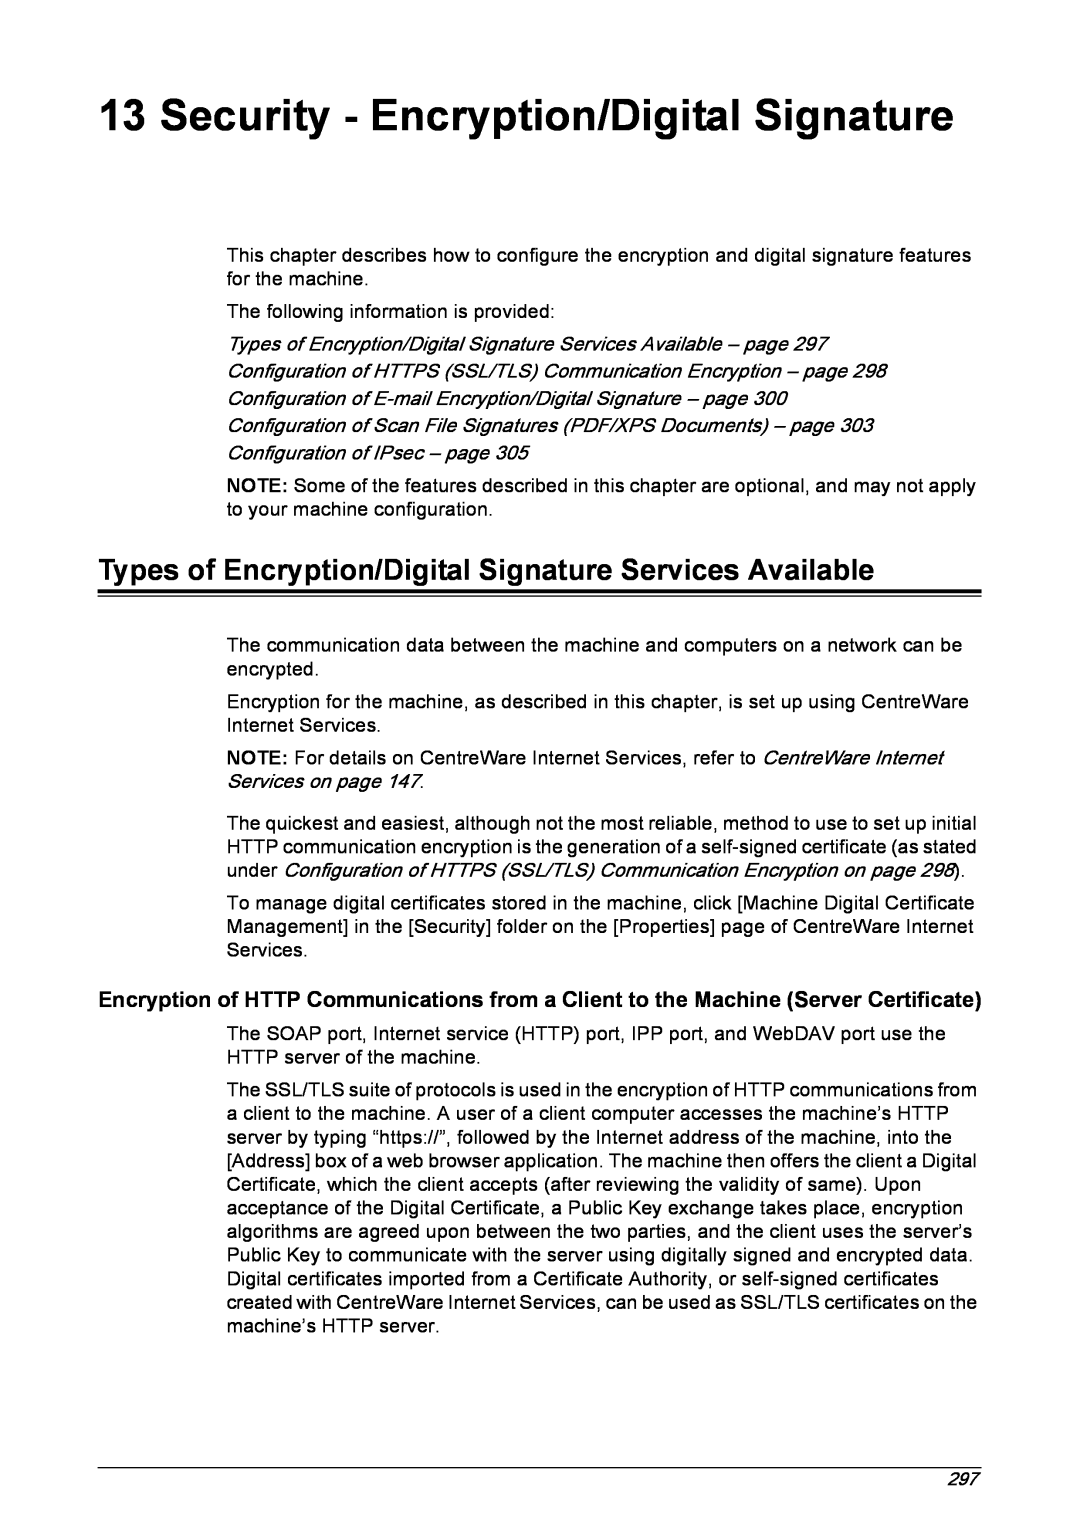 Xerox 5222 manual Security - Encryption/Digital Signature, Configuration of IPsec – page 